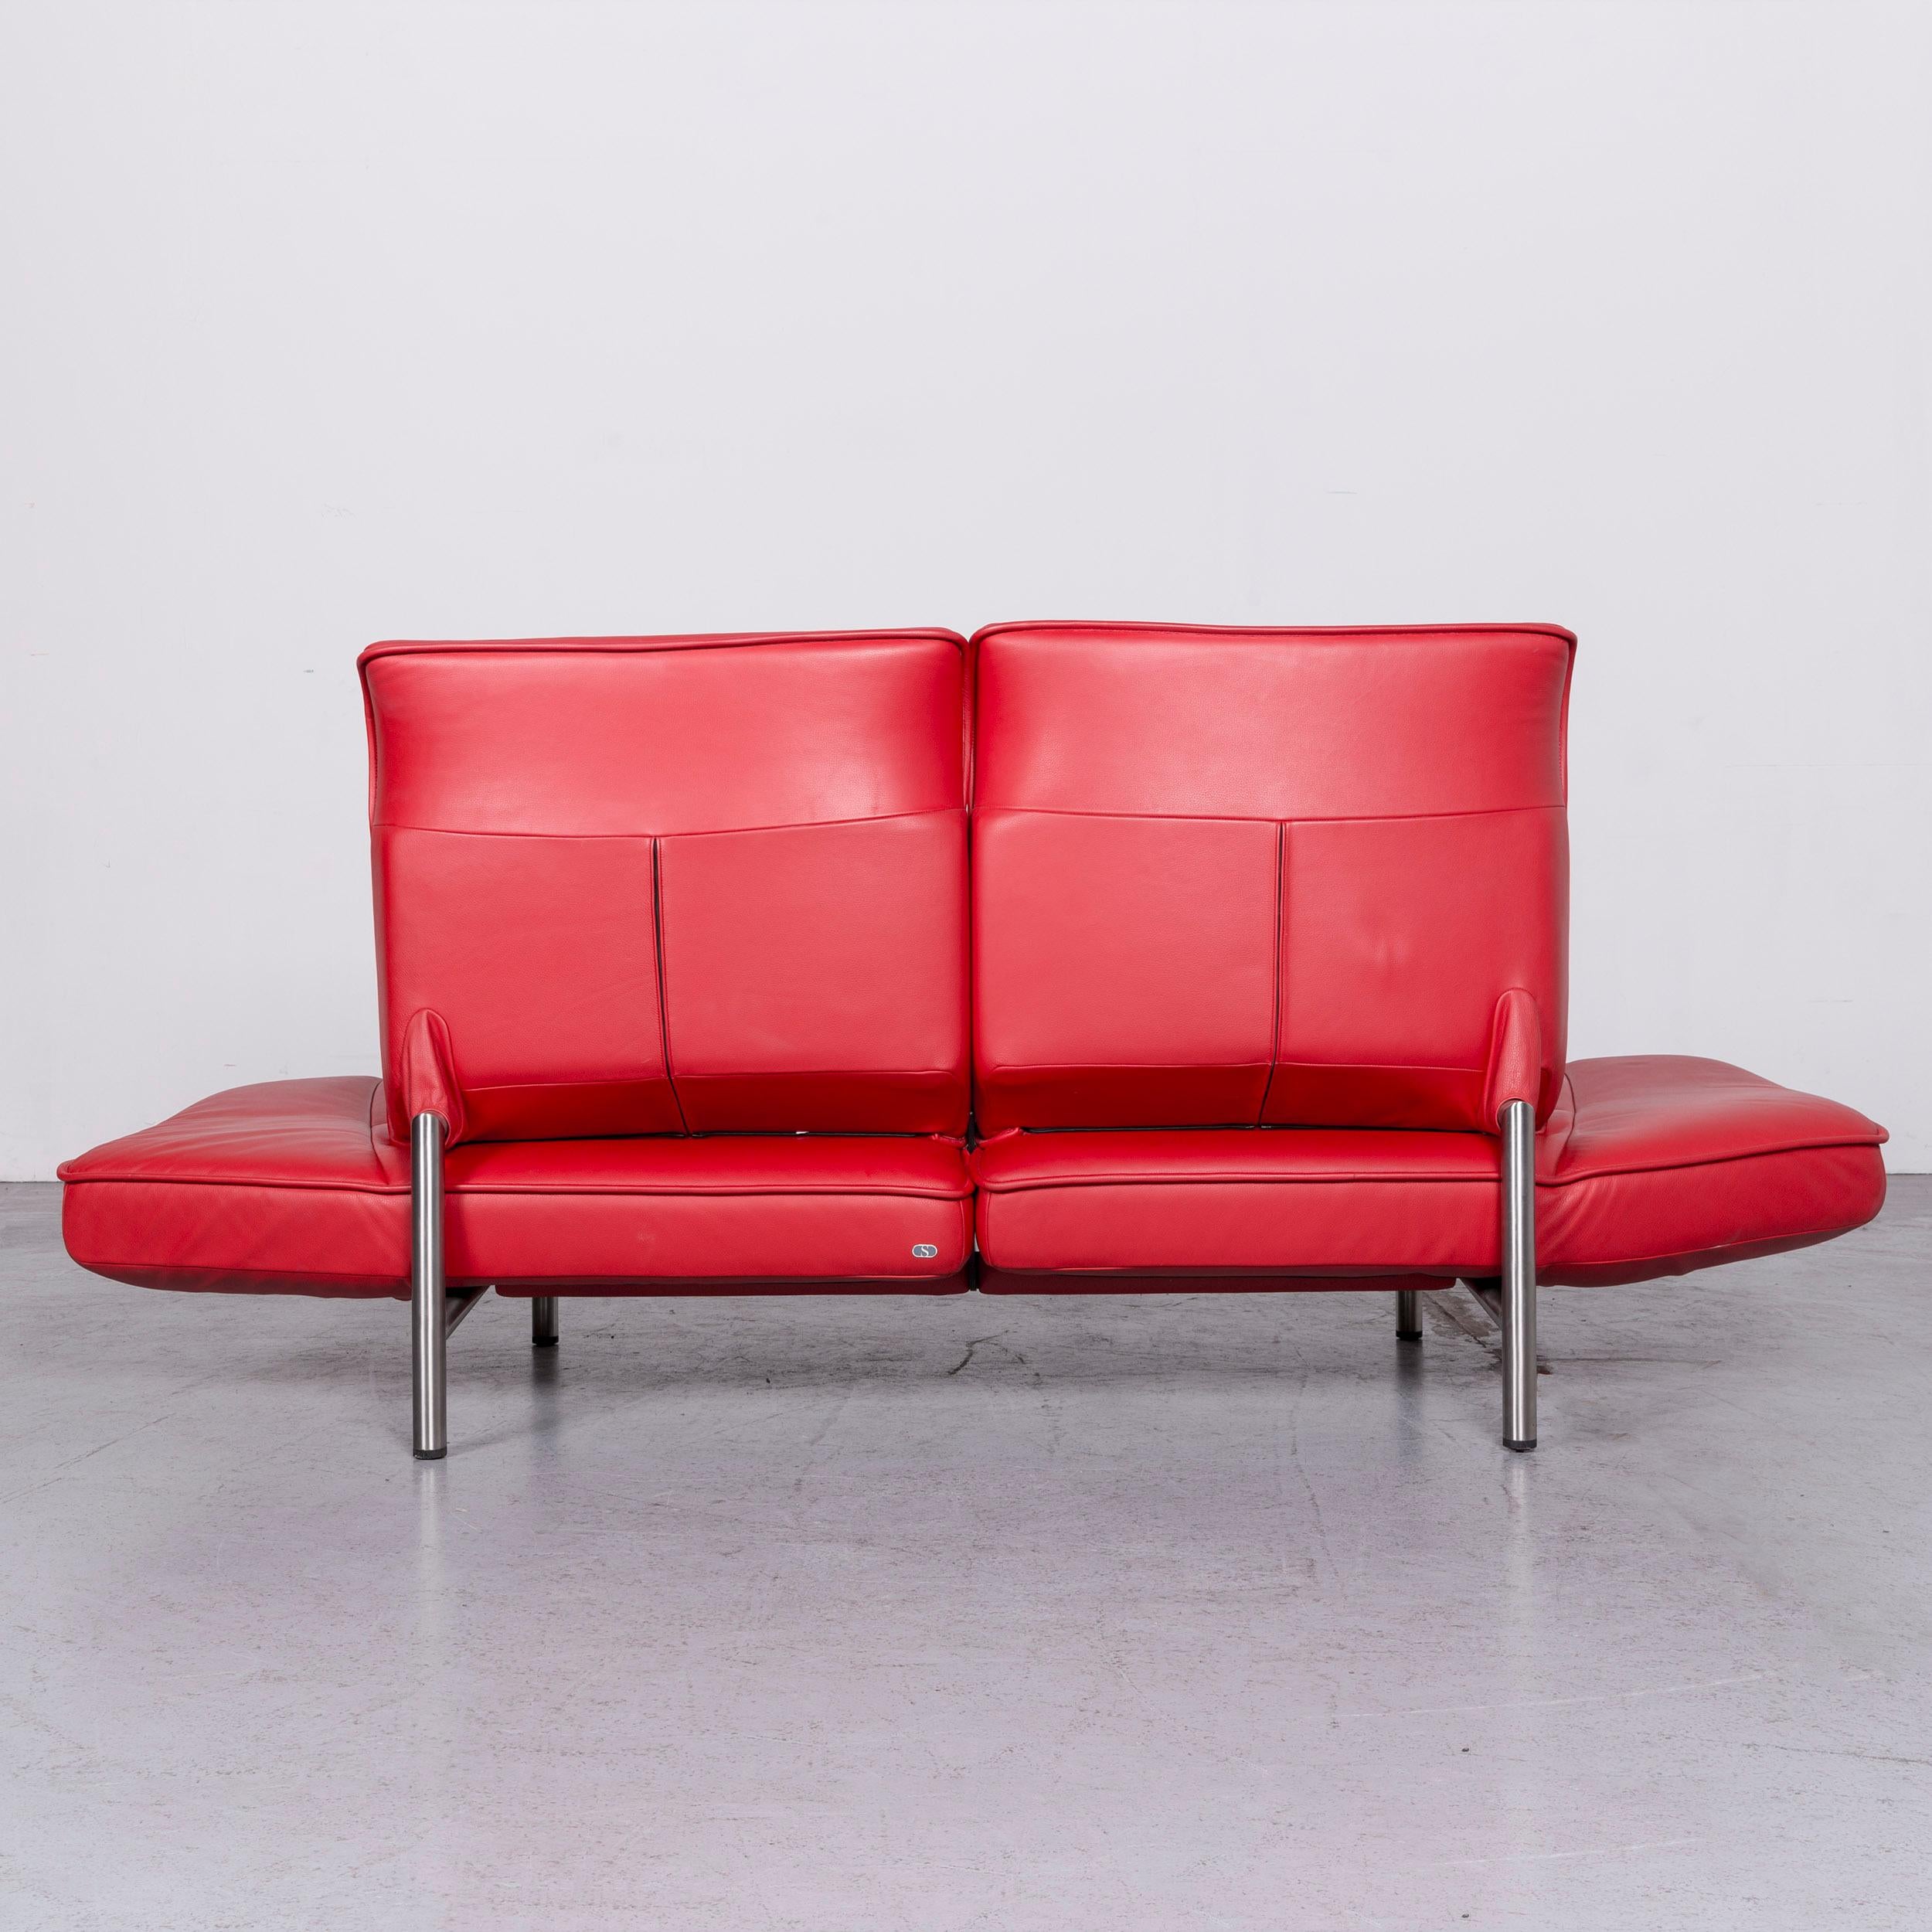 De Sede DS 450 Designer Sofa Red Leather Three-Seat Couch Made in Switzerland For Sale 8